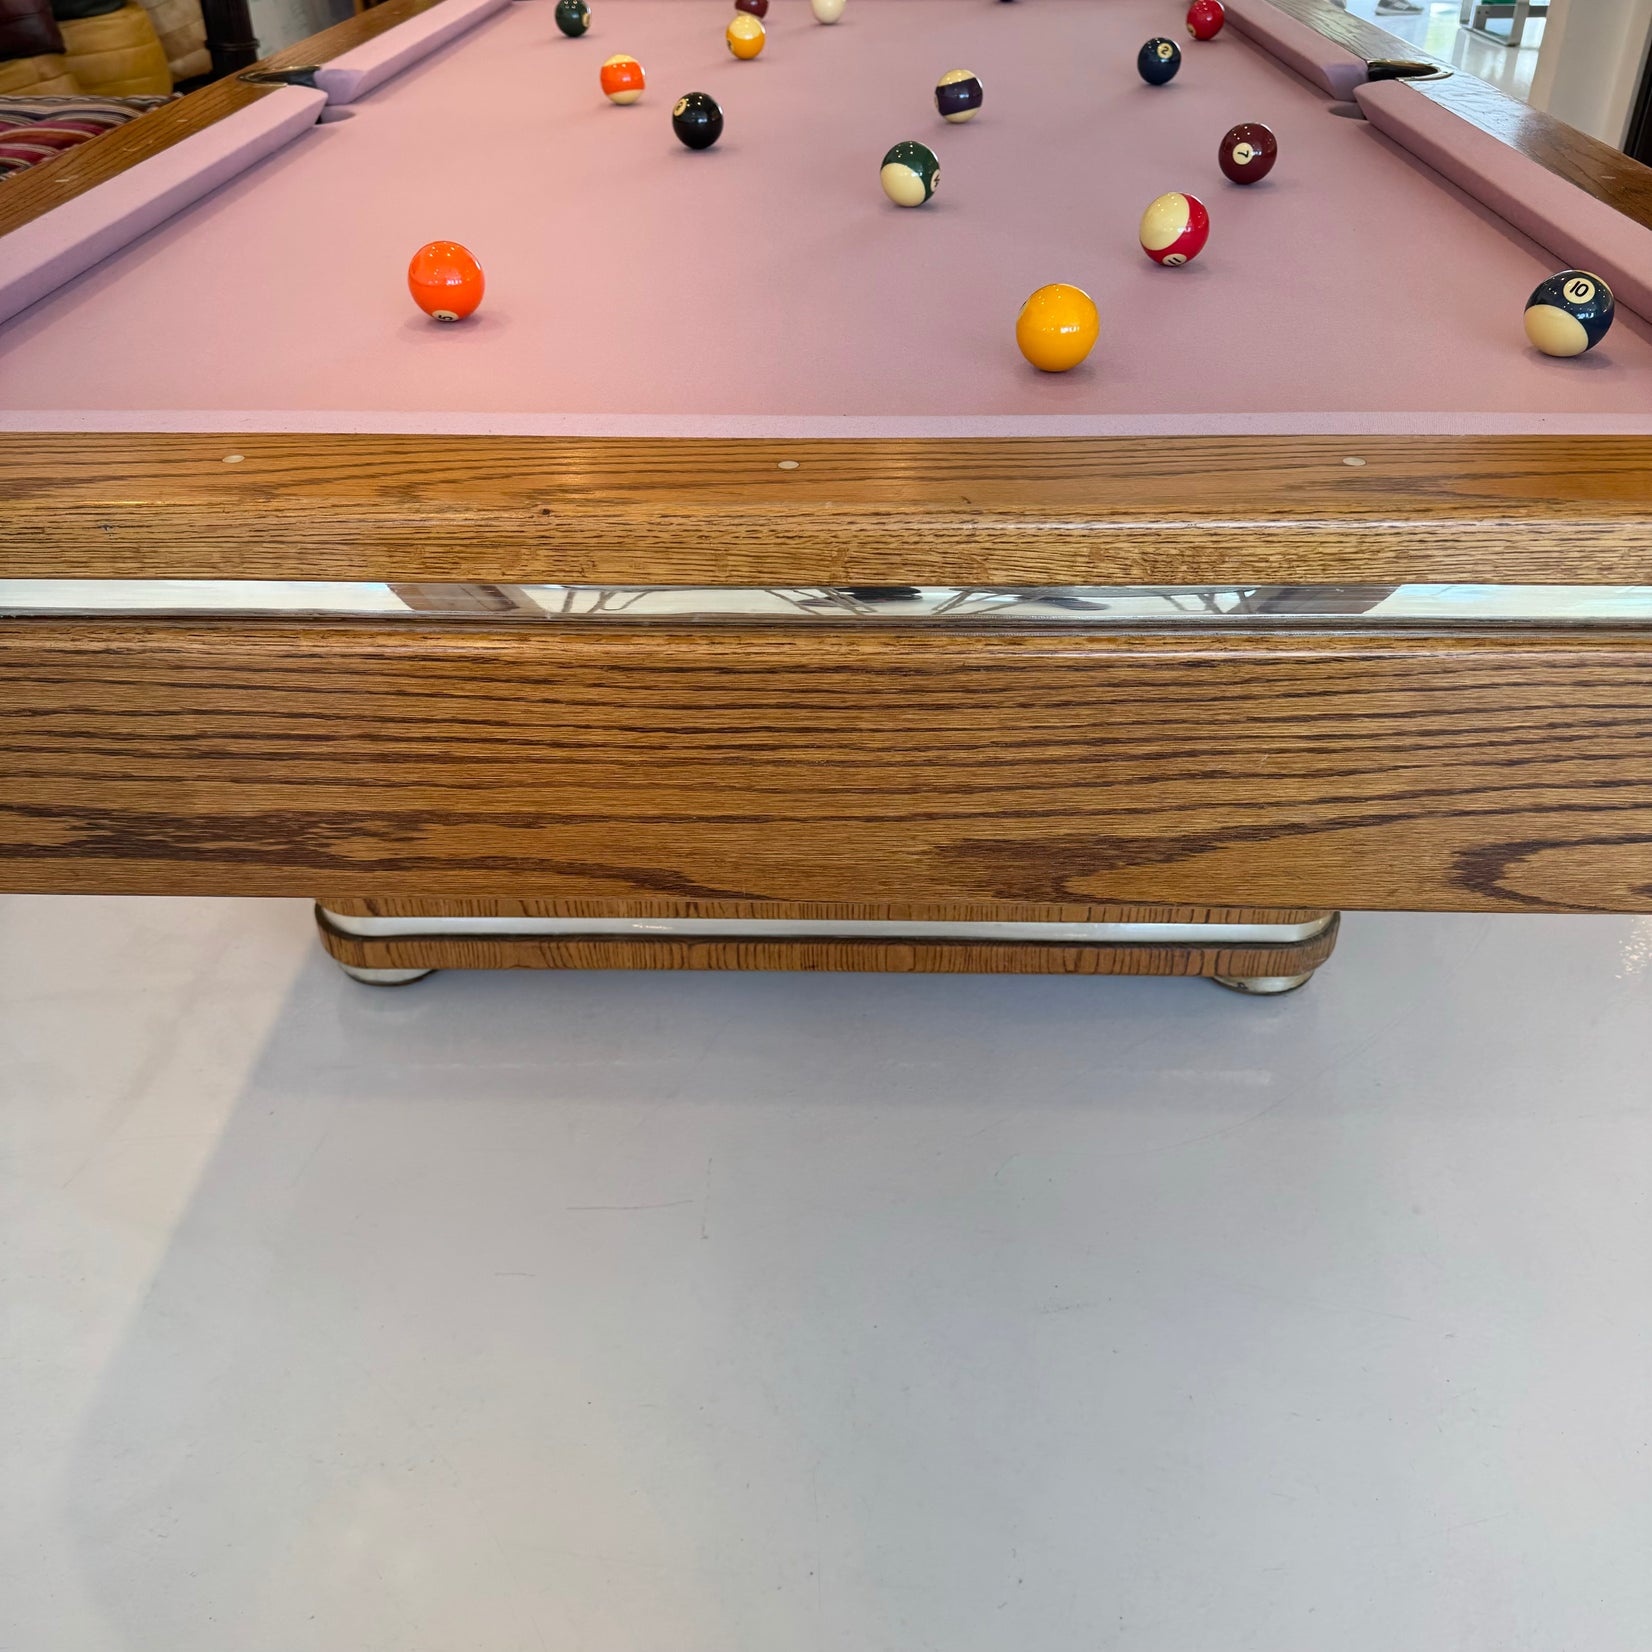 Oak and Brass Pool Table